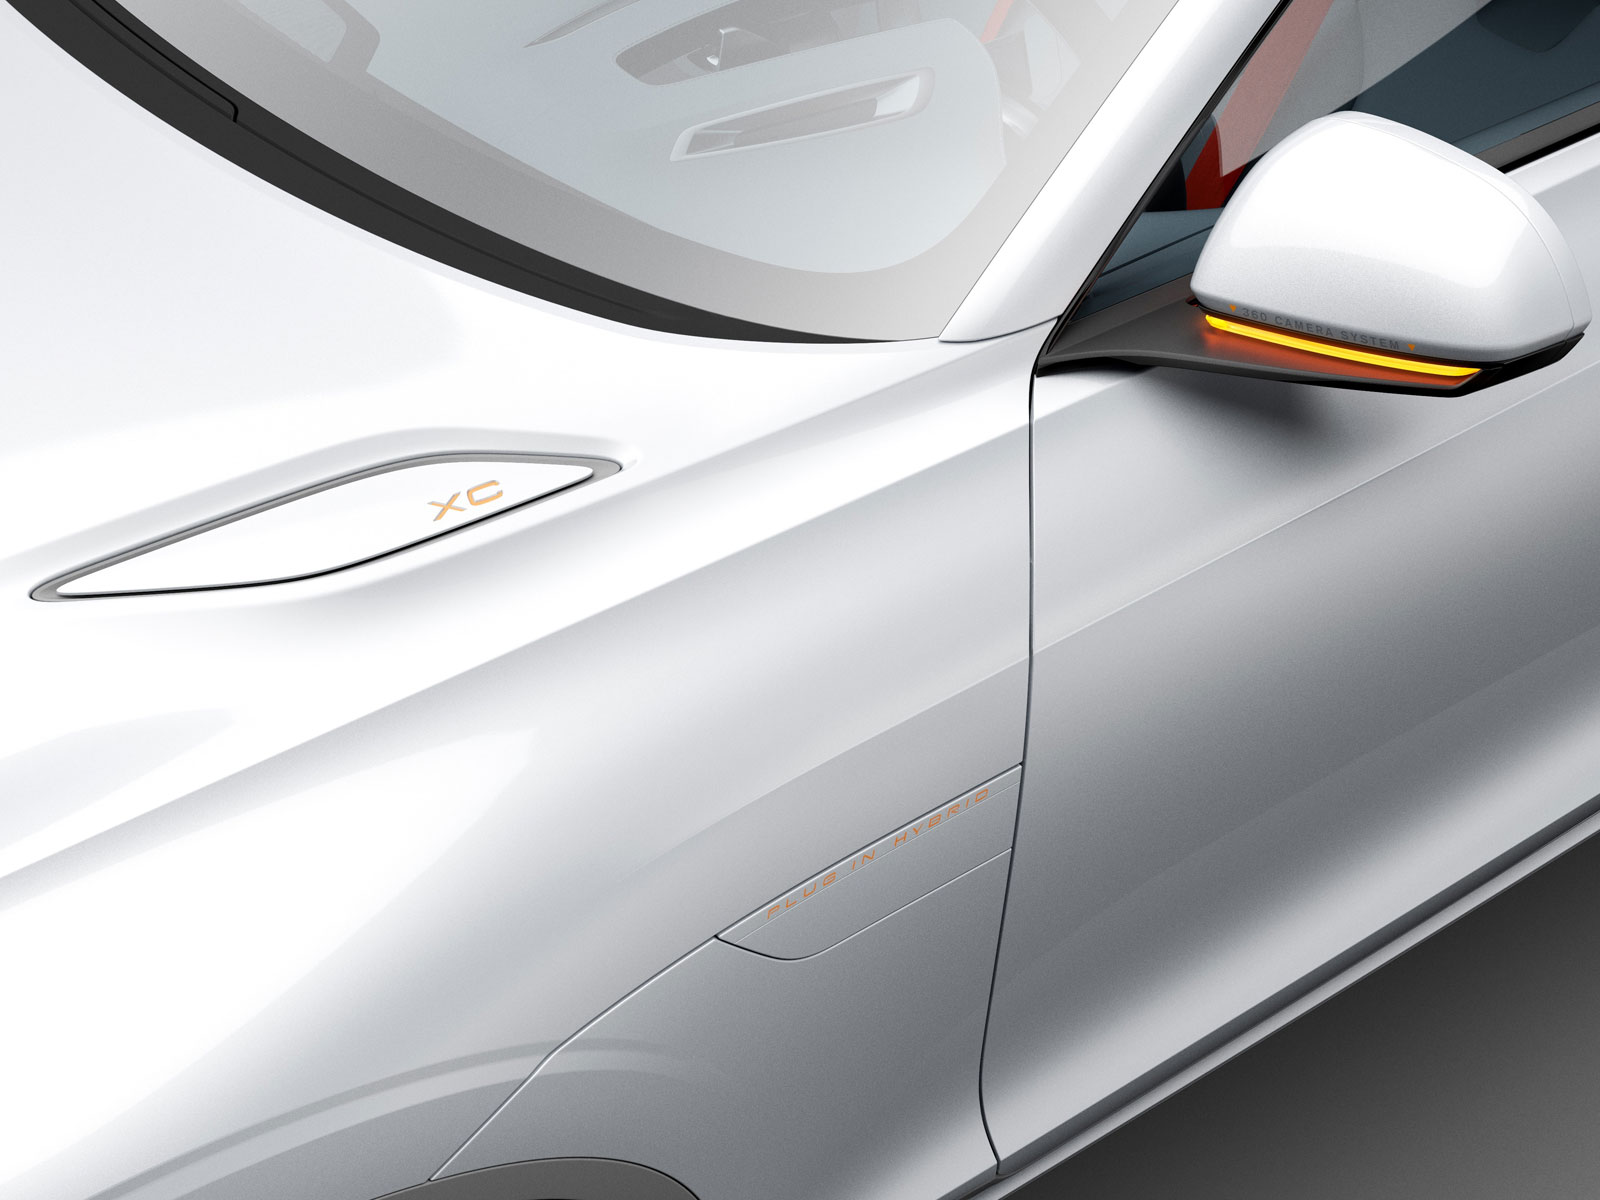 Volvo Concept XC Coupe, 2014 - Front fender detail 